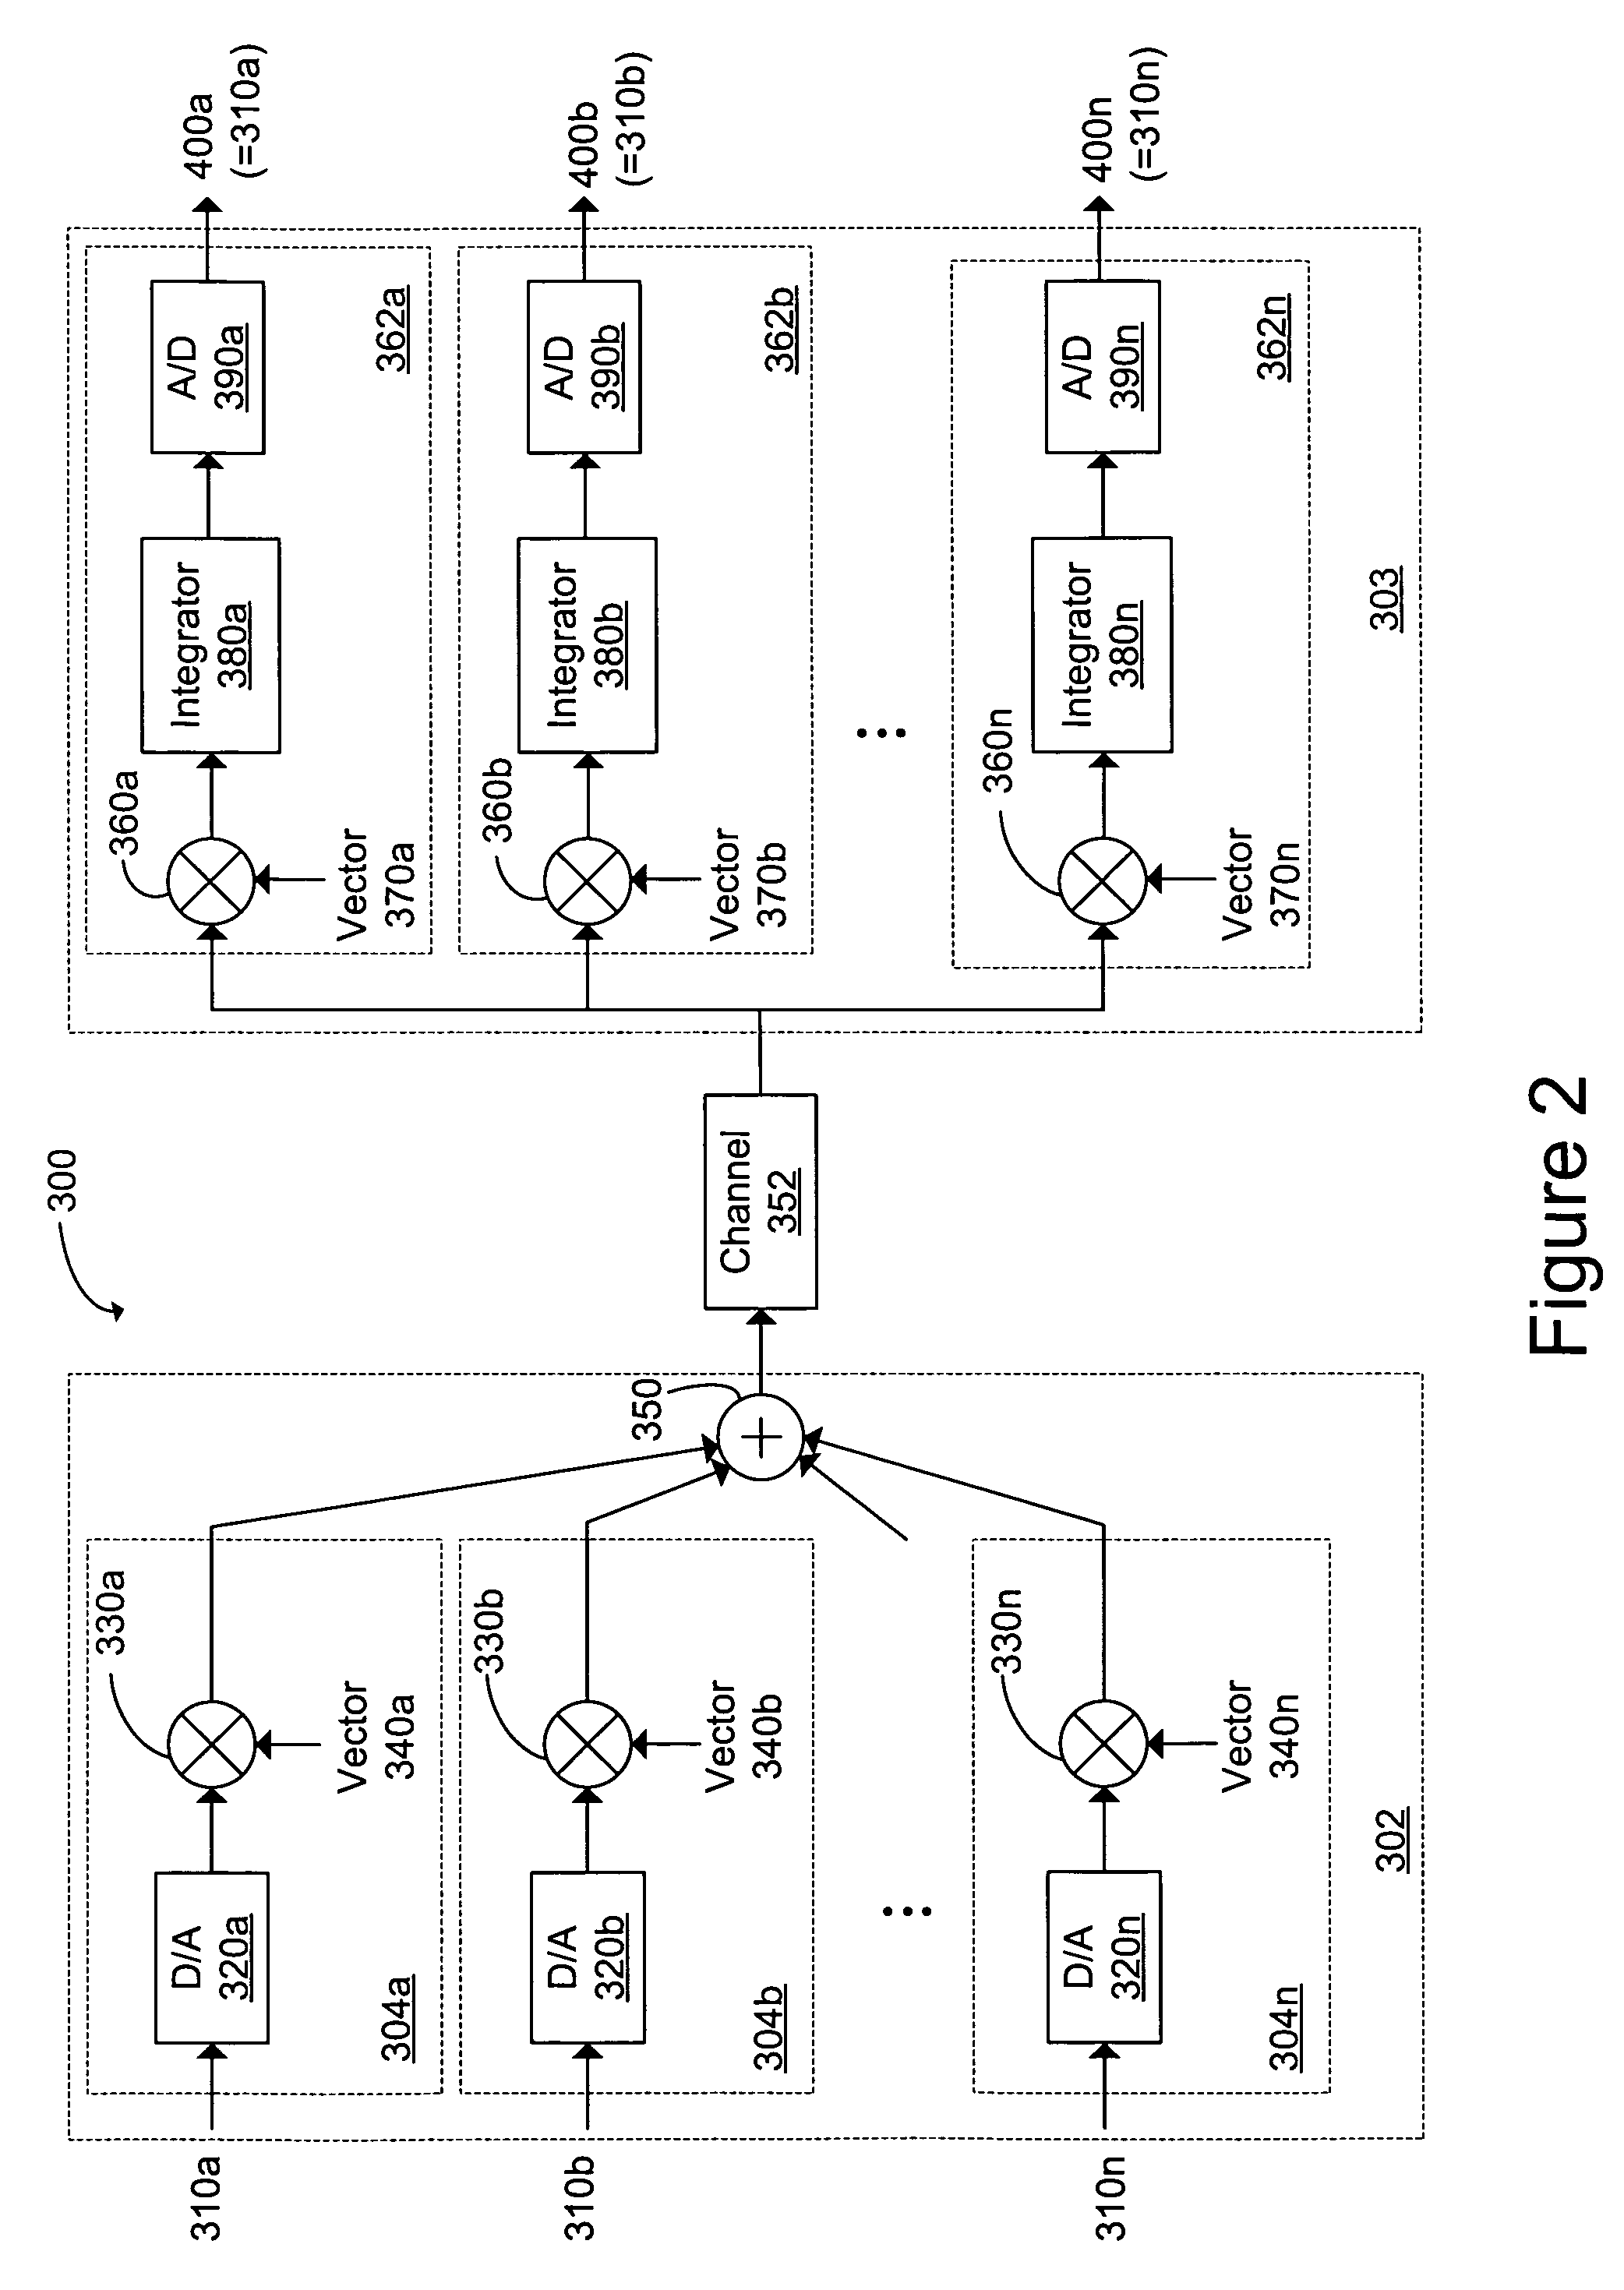 Approximate bit-loading for data transmission over frequency-selective channels